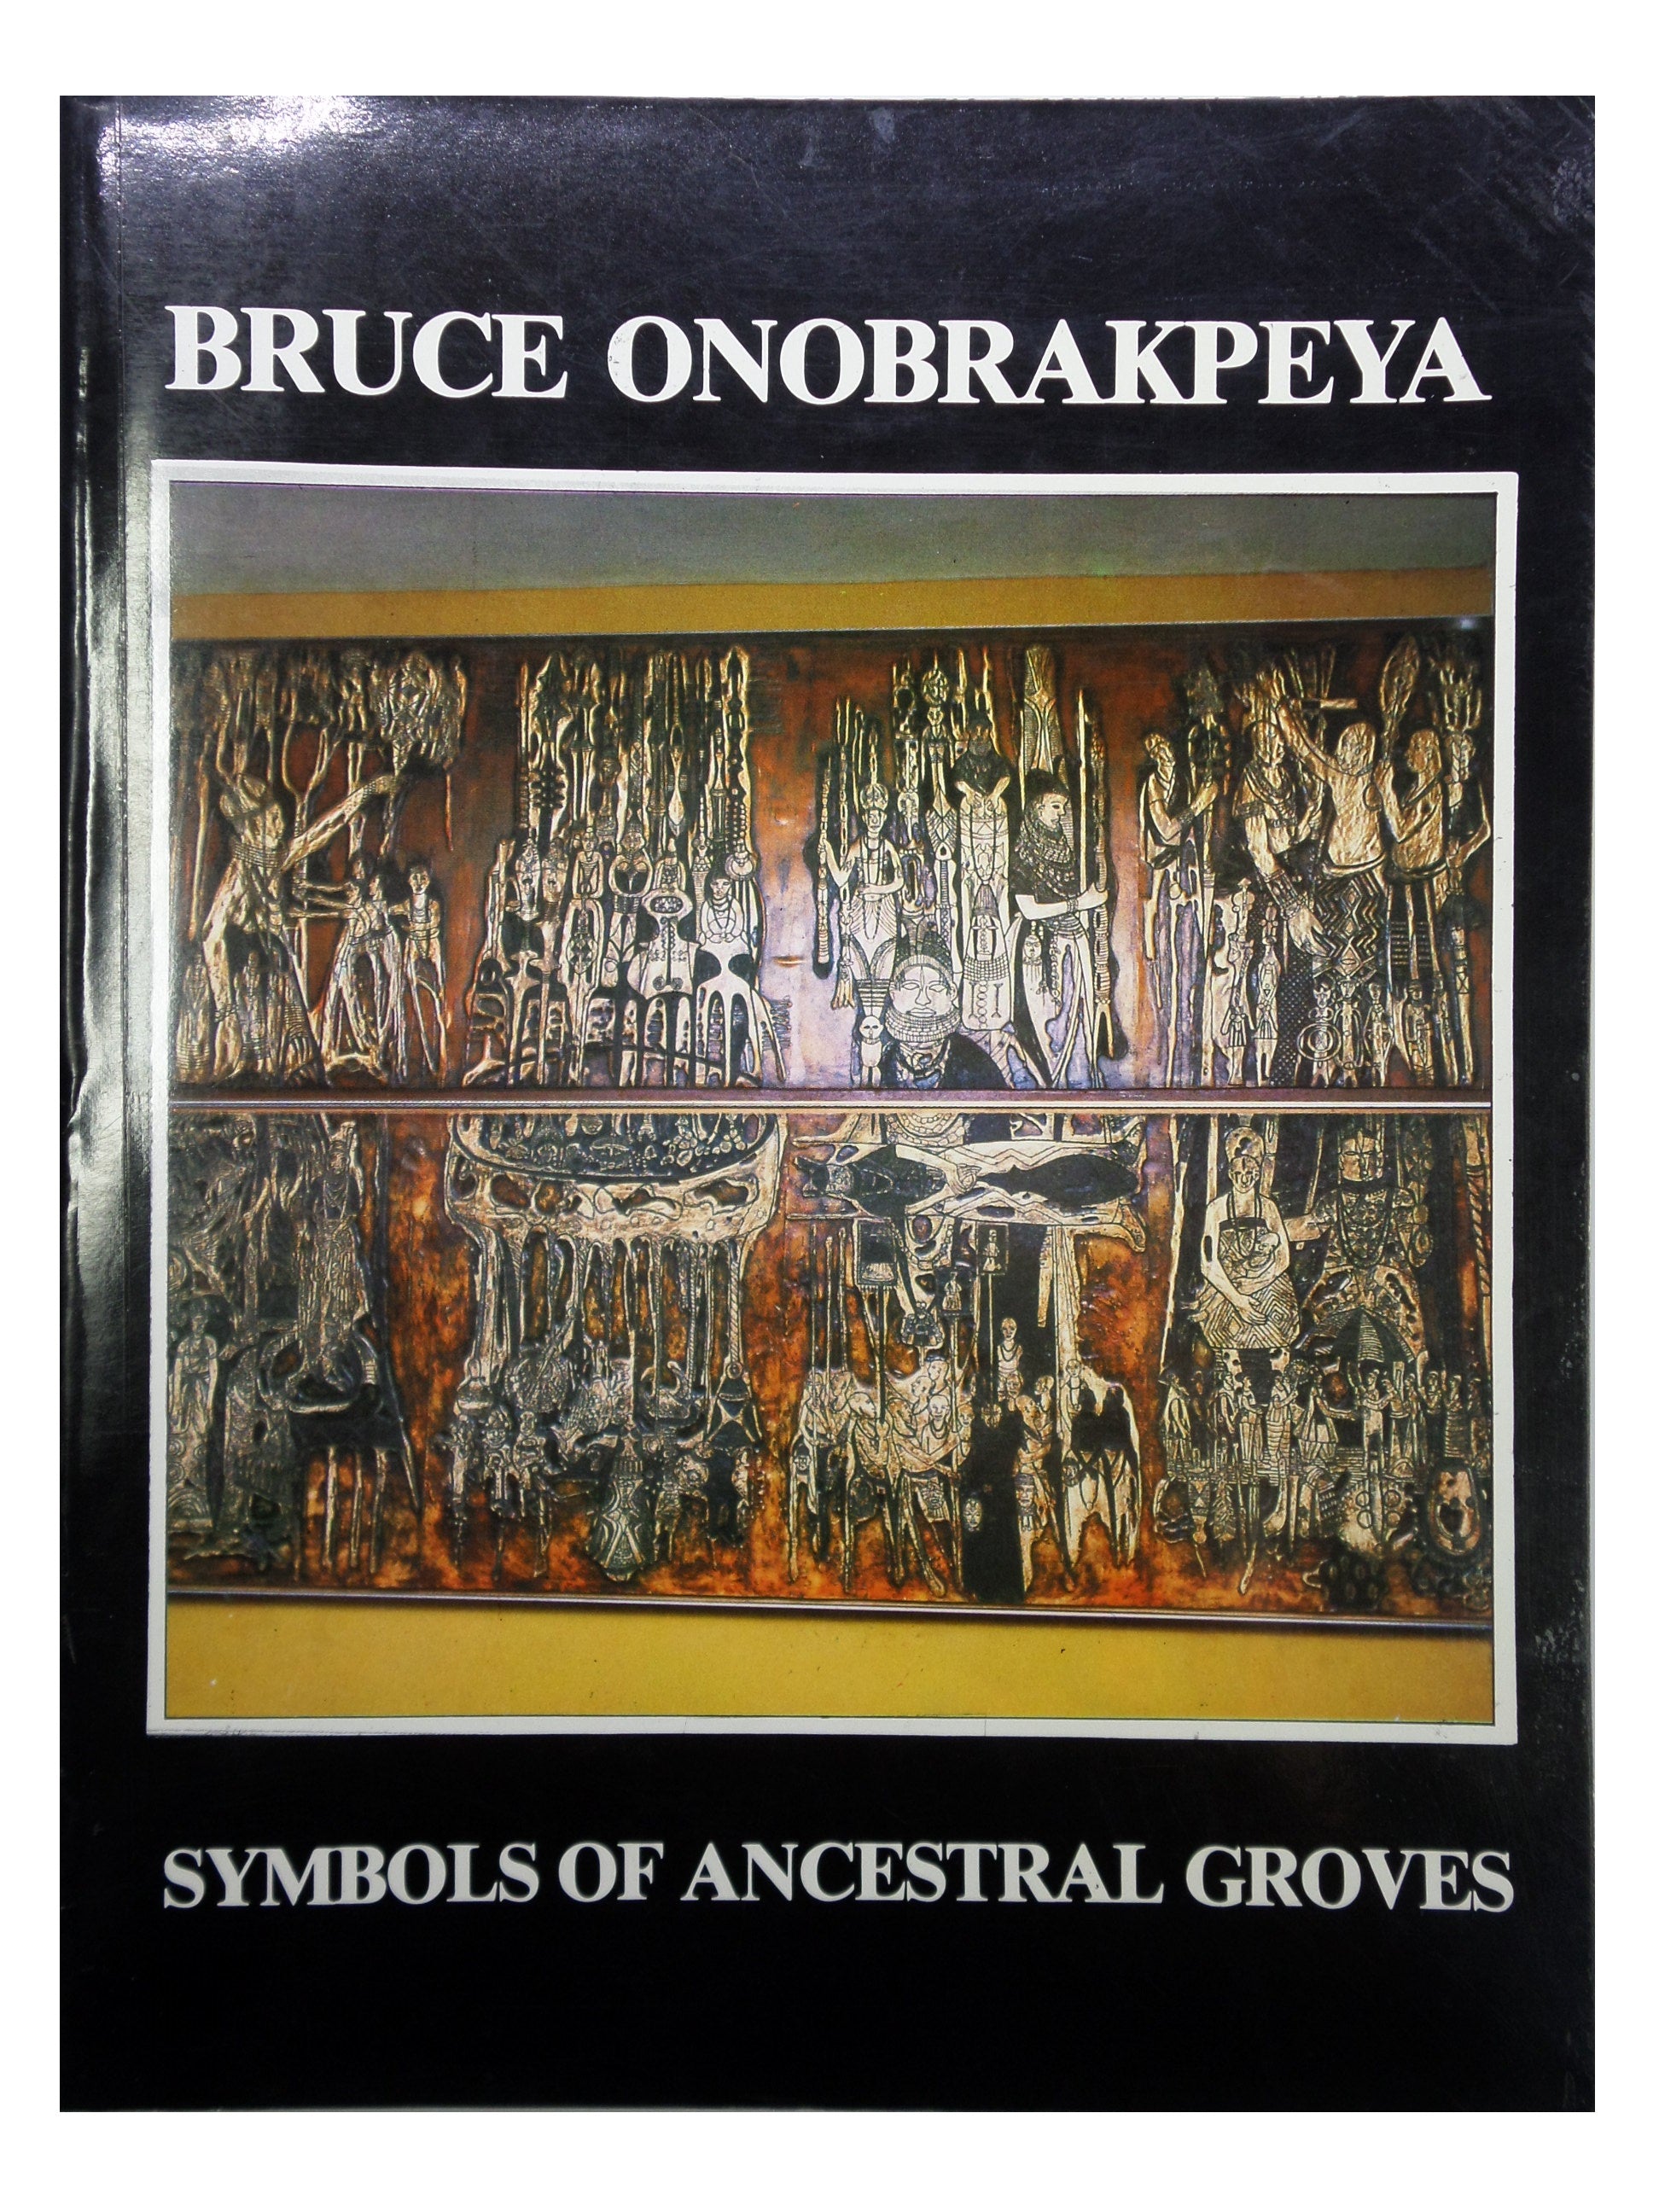 SYMBOLS OF ANCESTRAL GROVES BY BRUCE ONOBRAKPEYA 1985 INSCRIBED BY AUTHOR